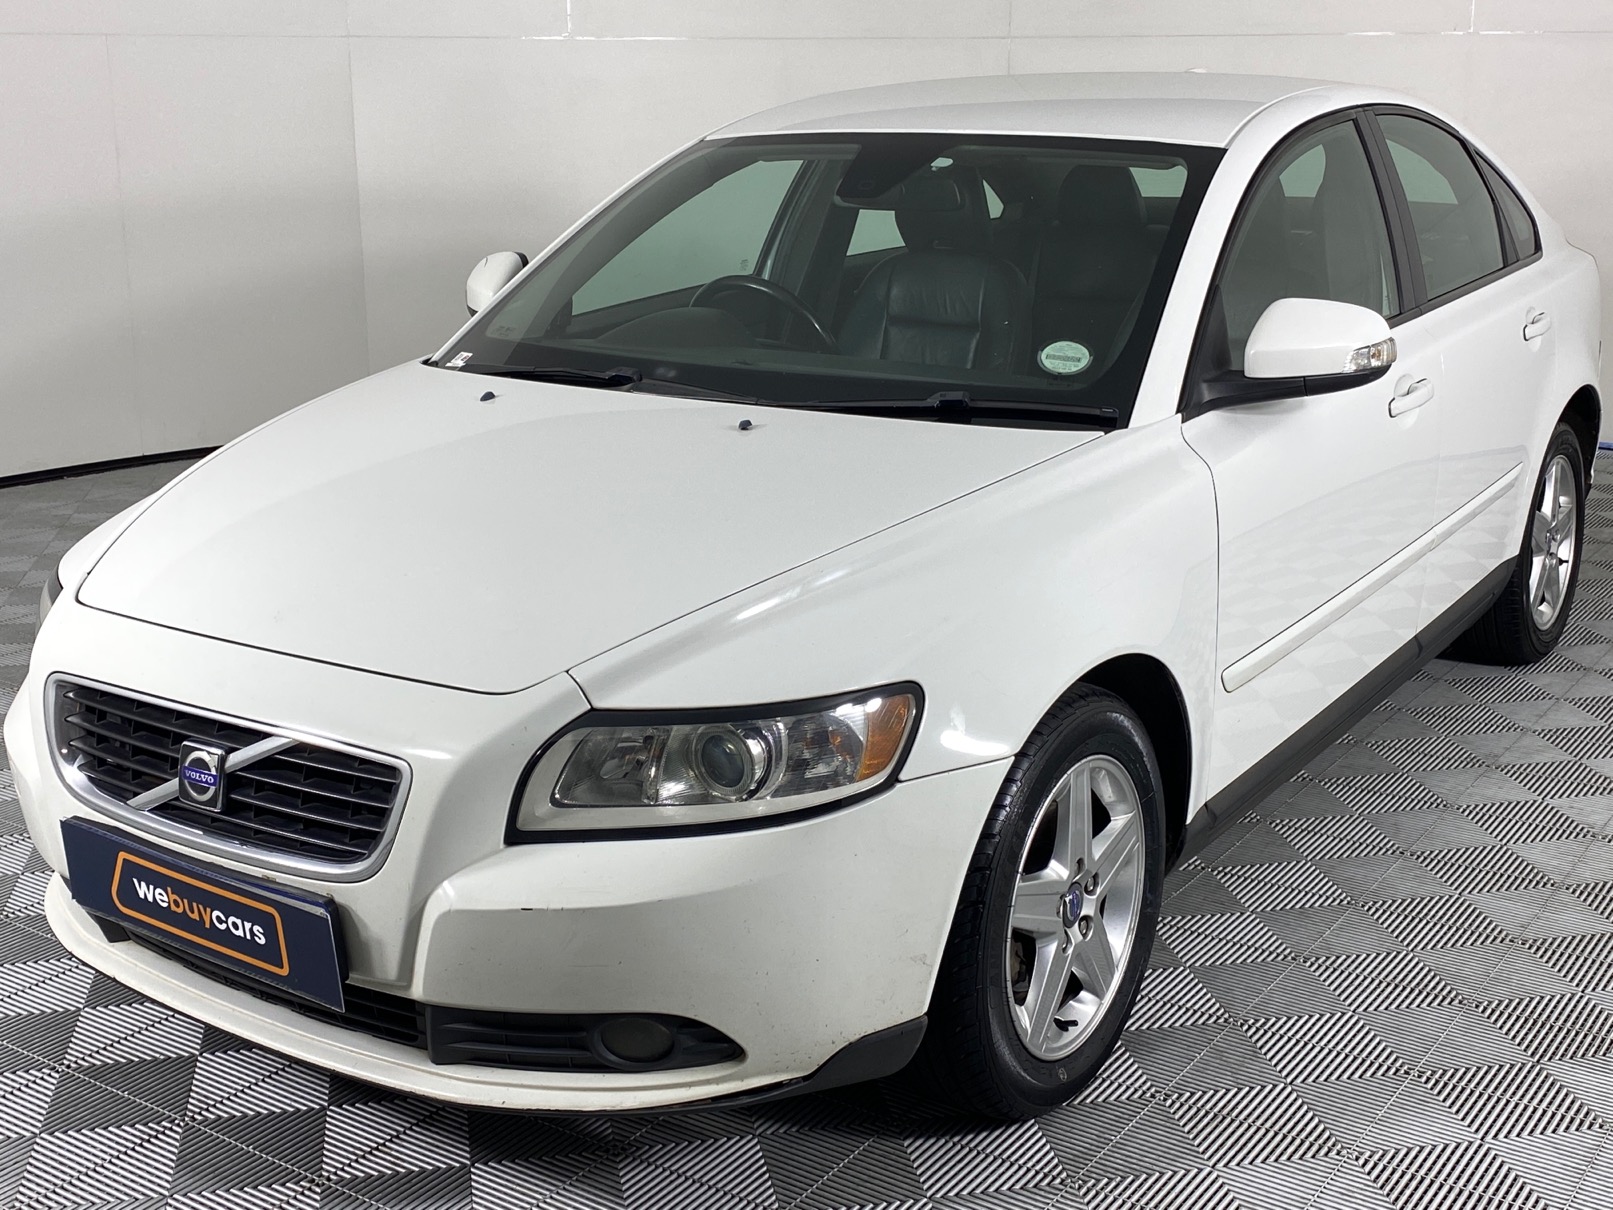 Used 2010 Volvo S40 2.0 Powershift for sale WeBuyCars